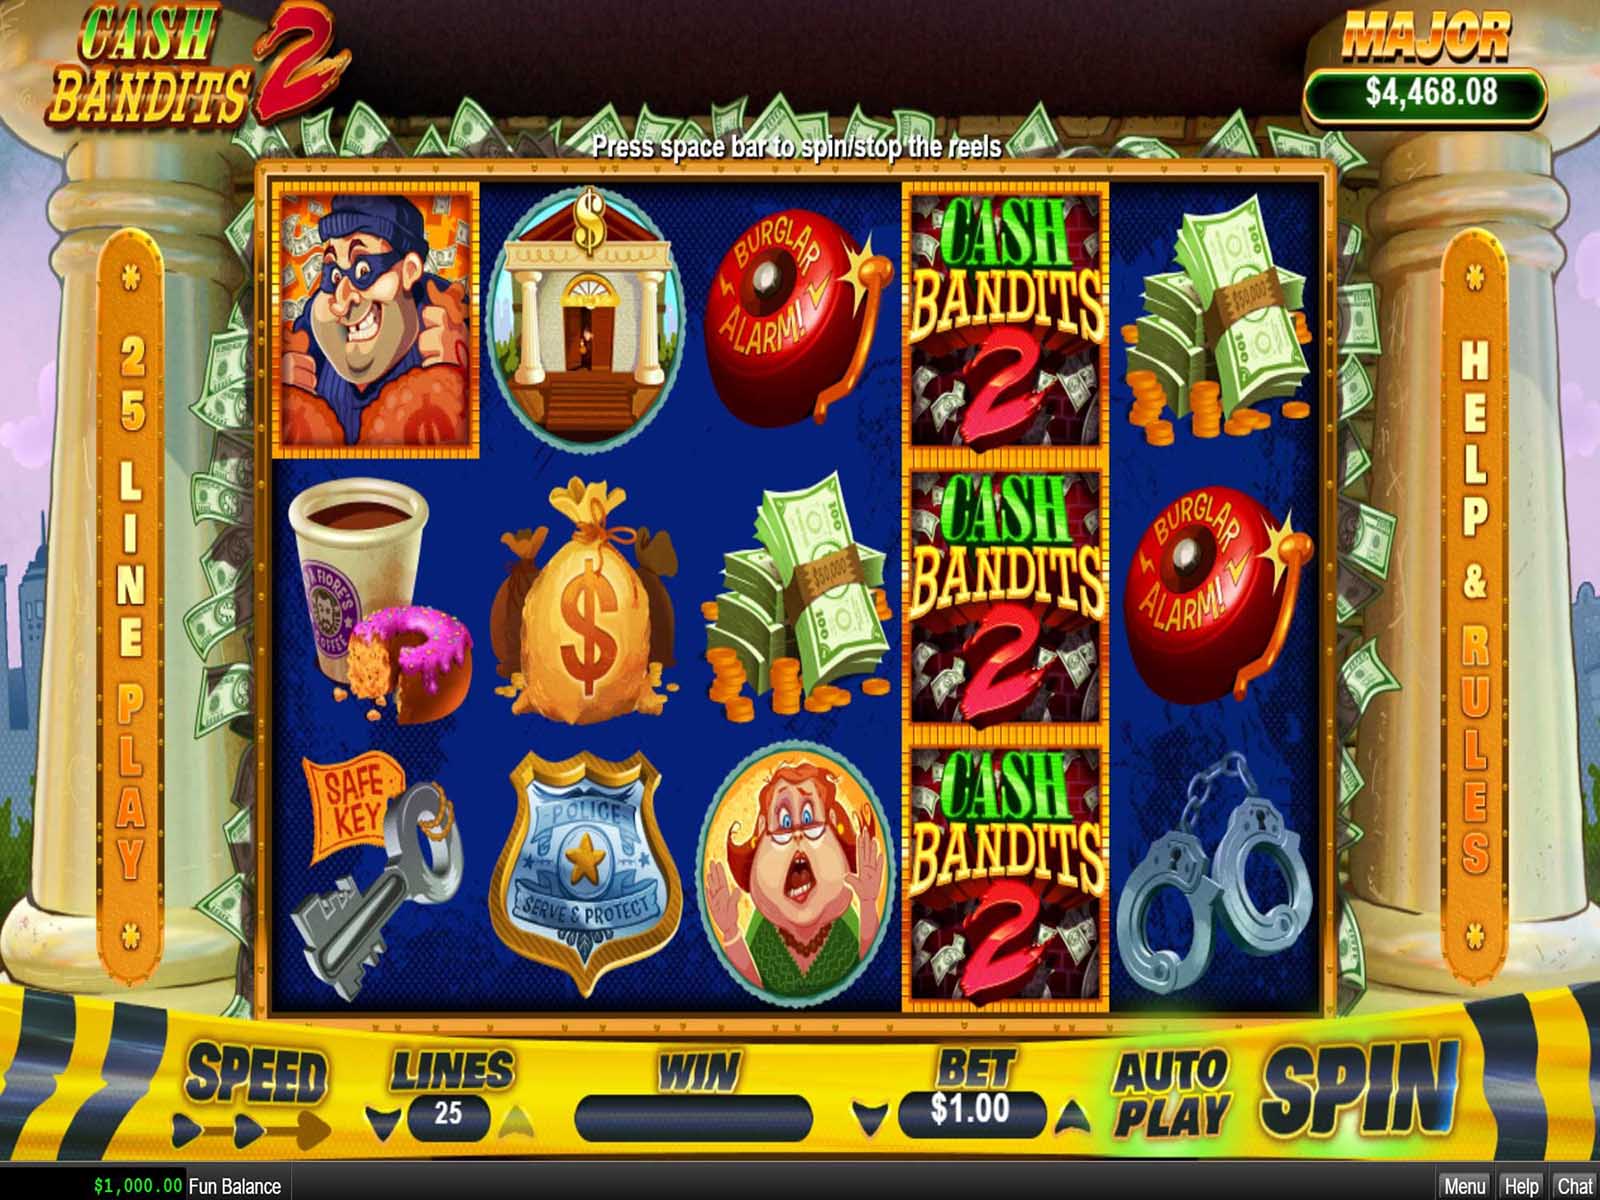 Play real slots with real money slot machine